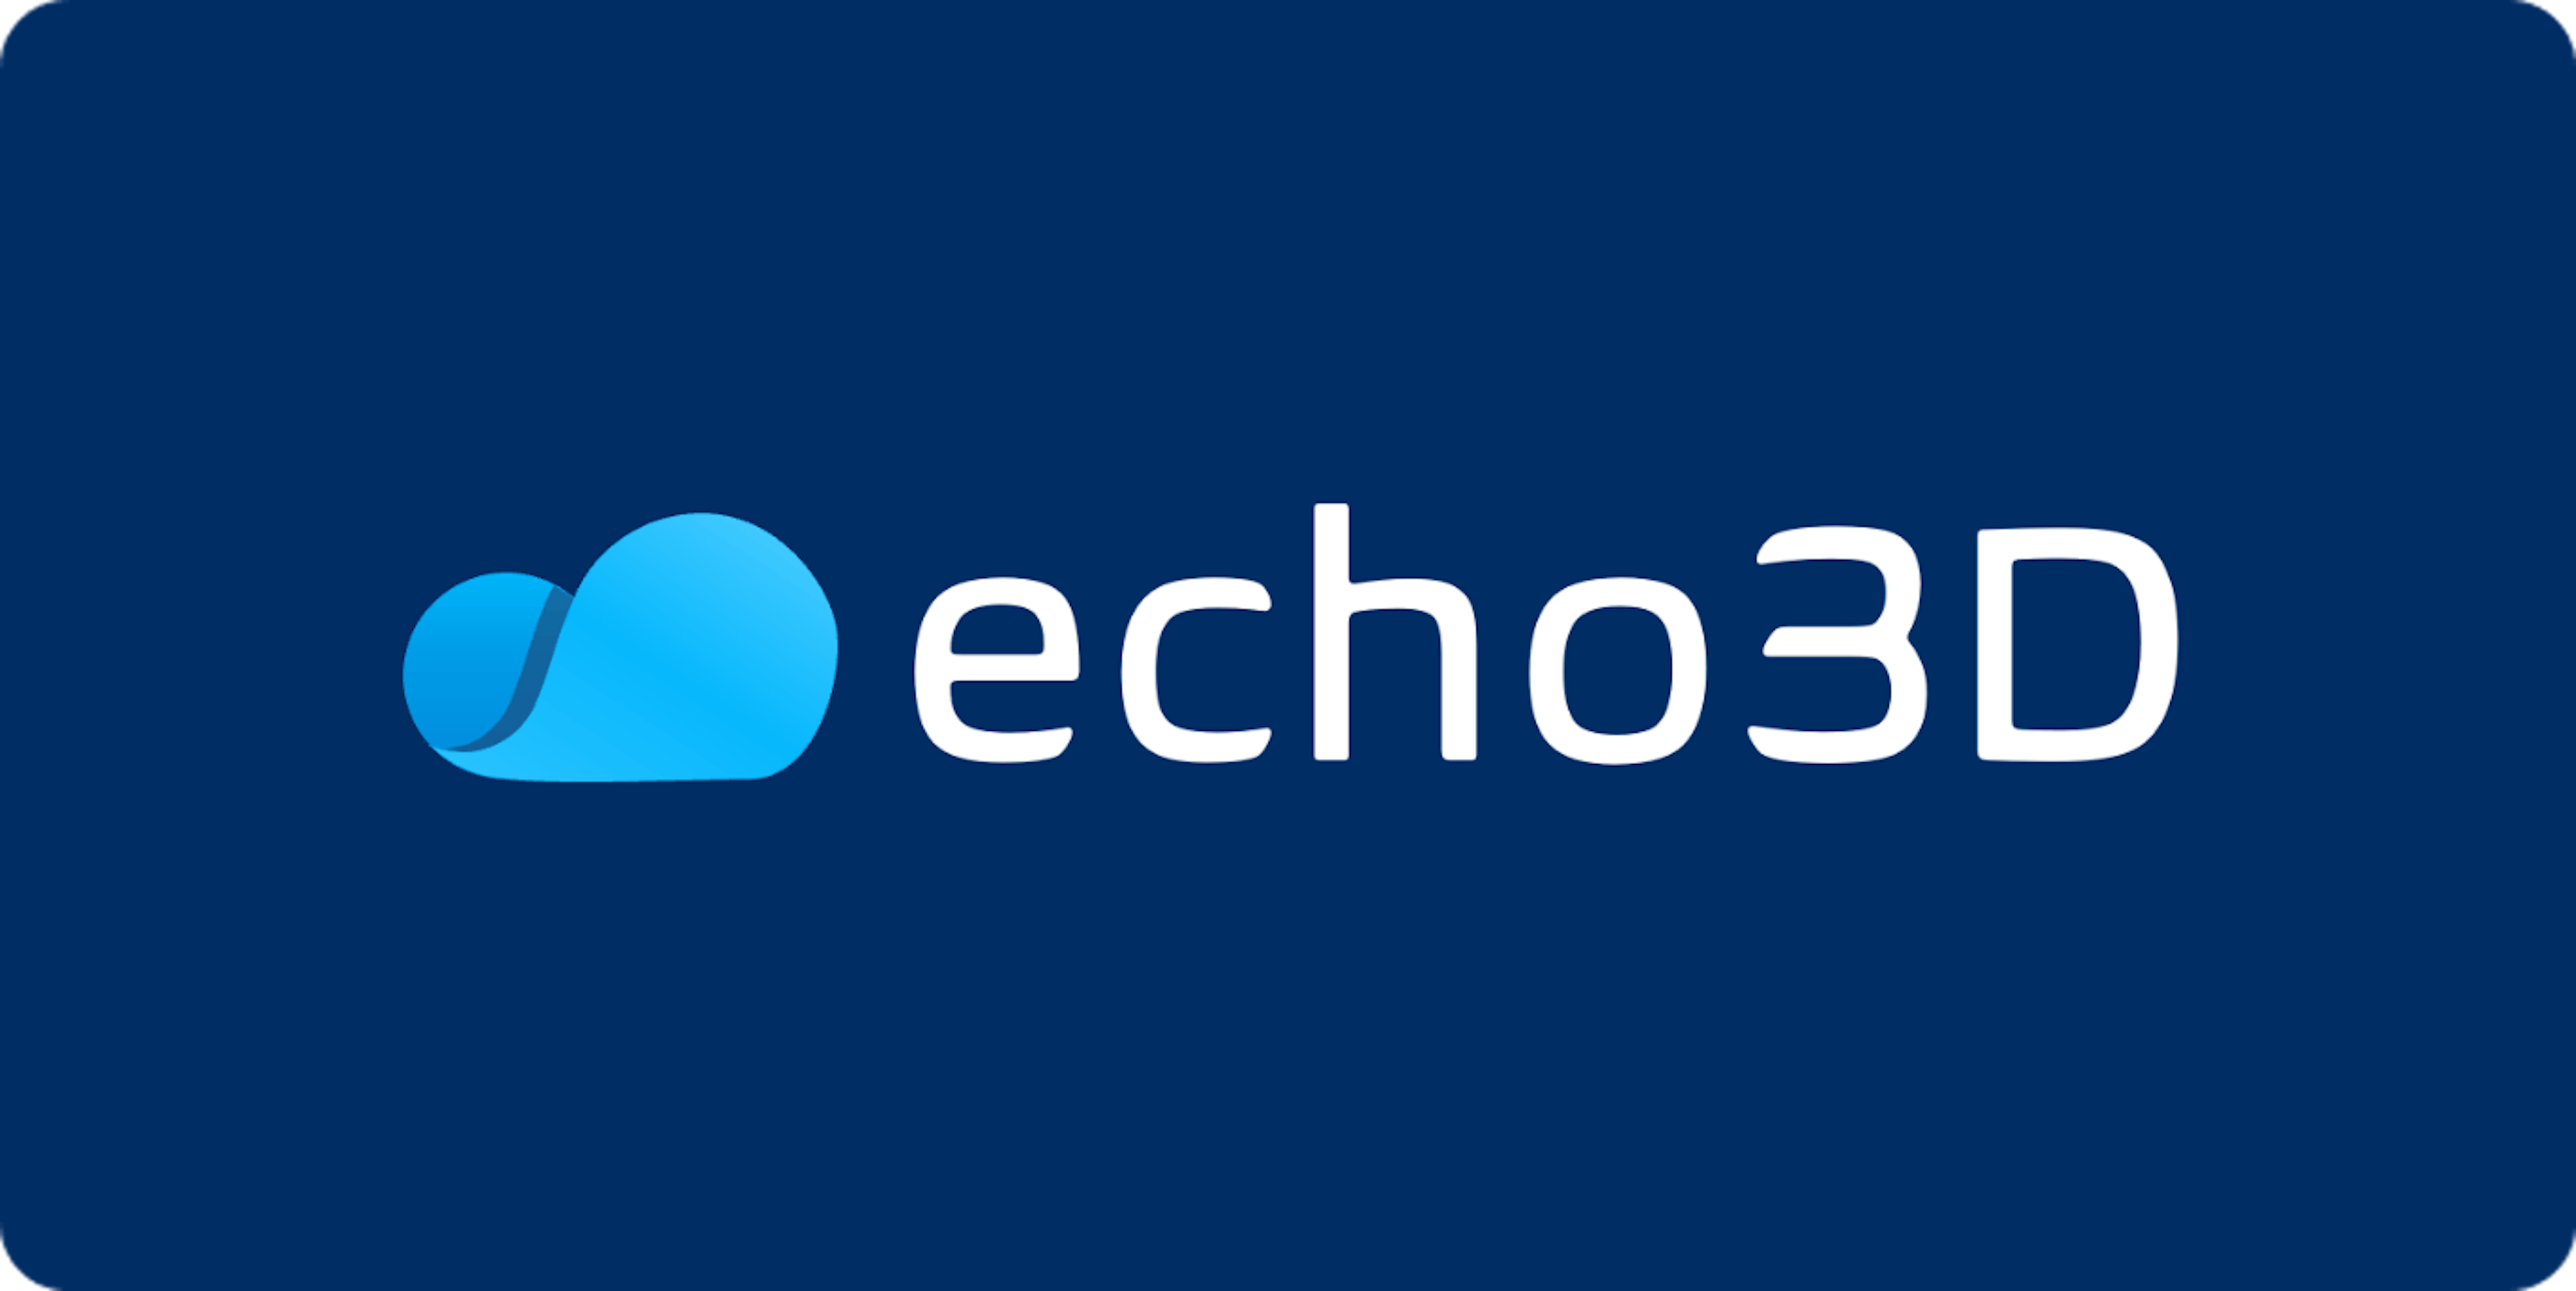 email echo3d